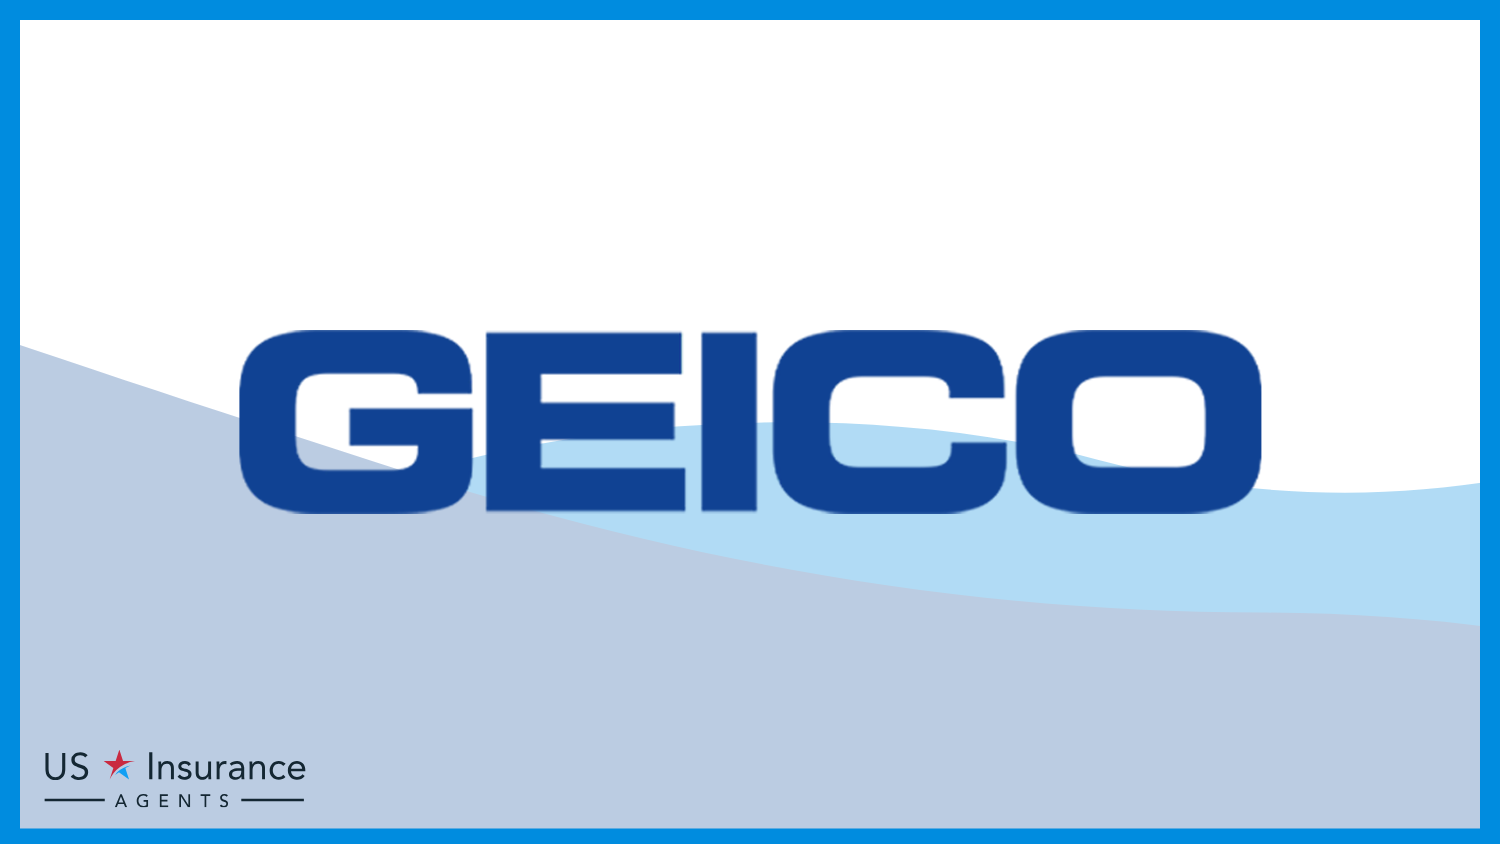 Geico: Best Business Insurance for Bodyguards